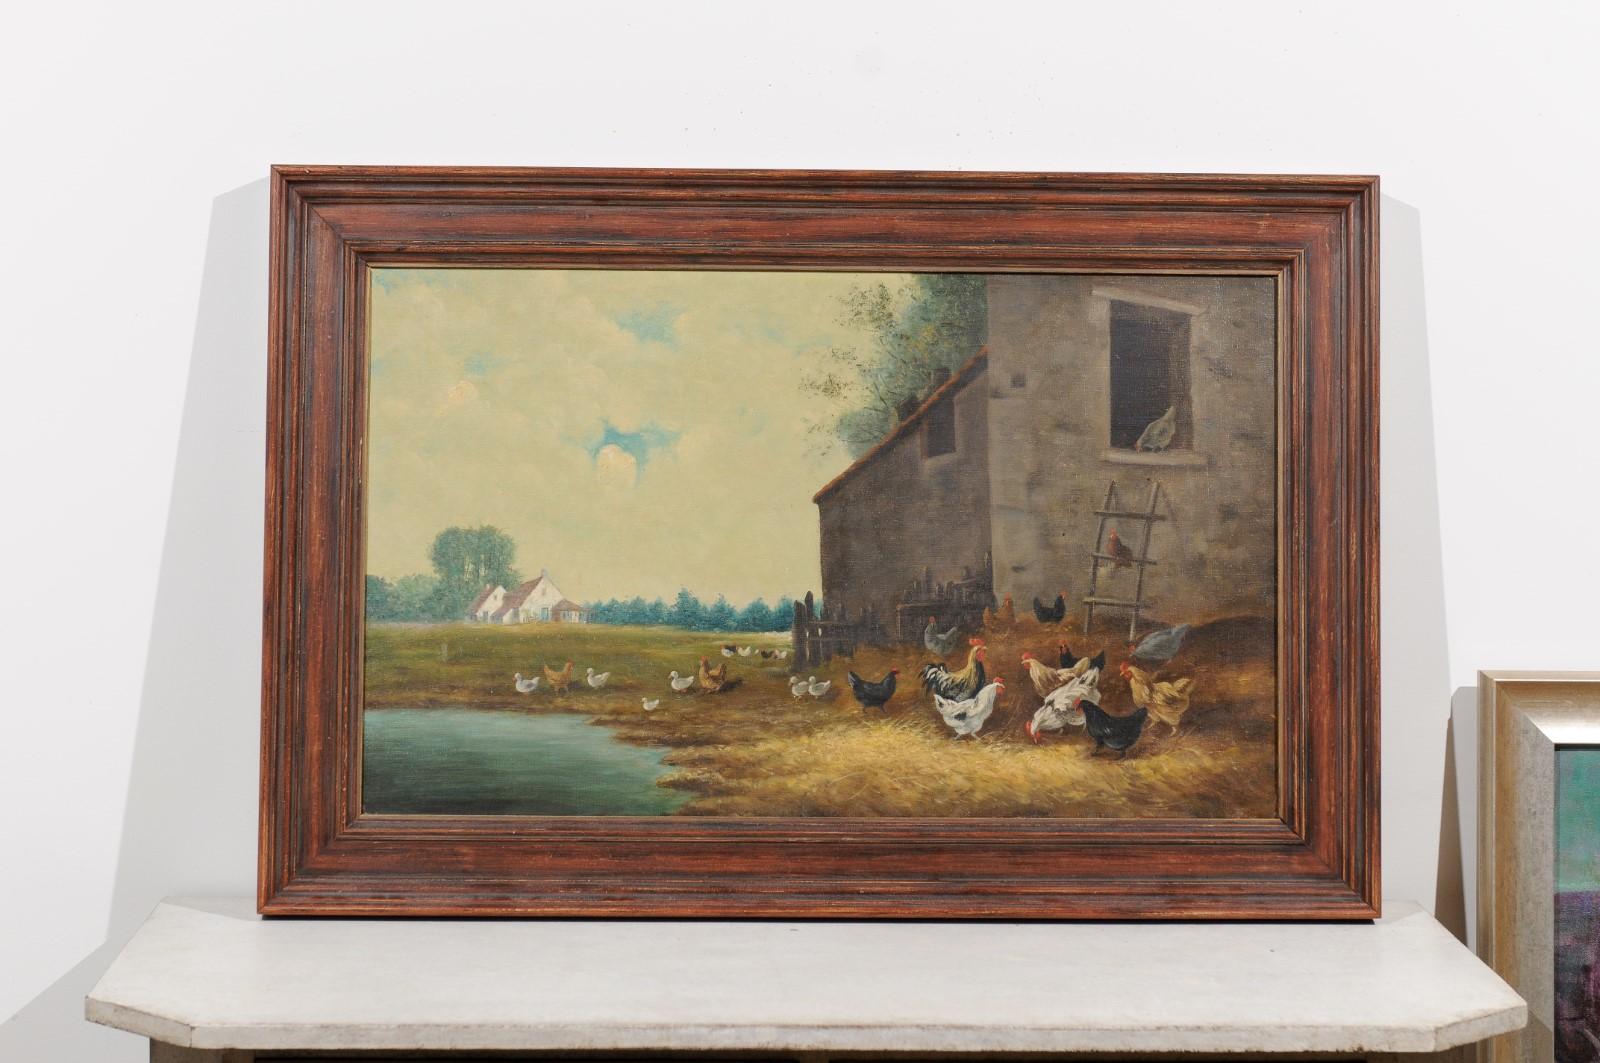 A French framed oil on canvas painting from the 19th century, depicting a farmyard with chickens and rooster. Created in France during the 19th century, this horizontal oil on canvas painting depicts a peaceful farm scene carefully composed. The